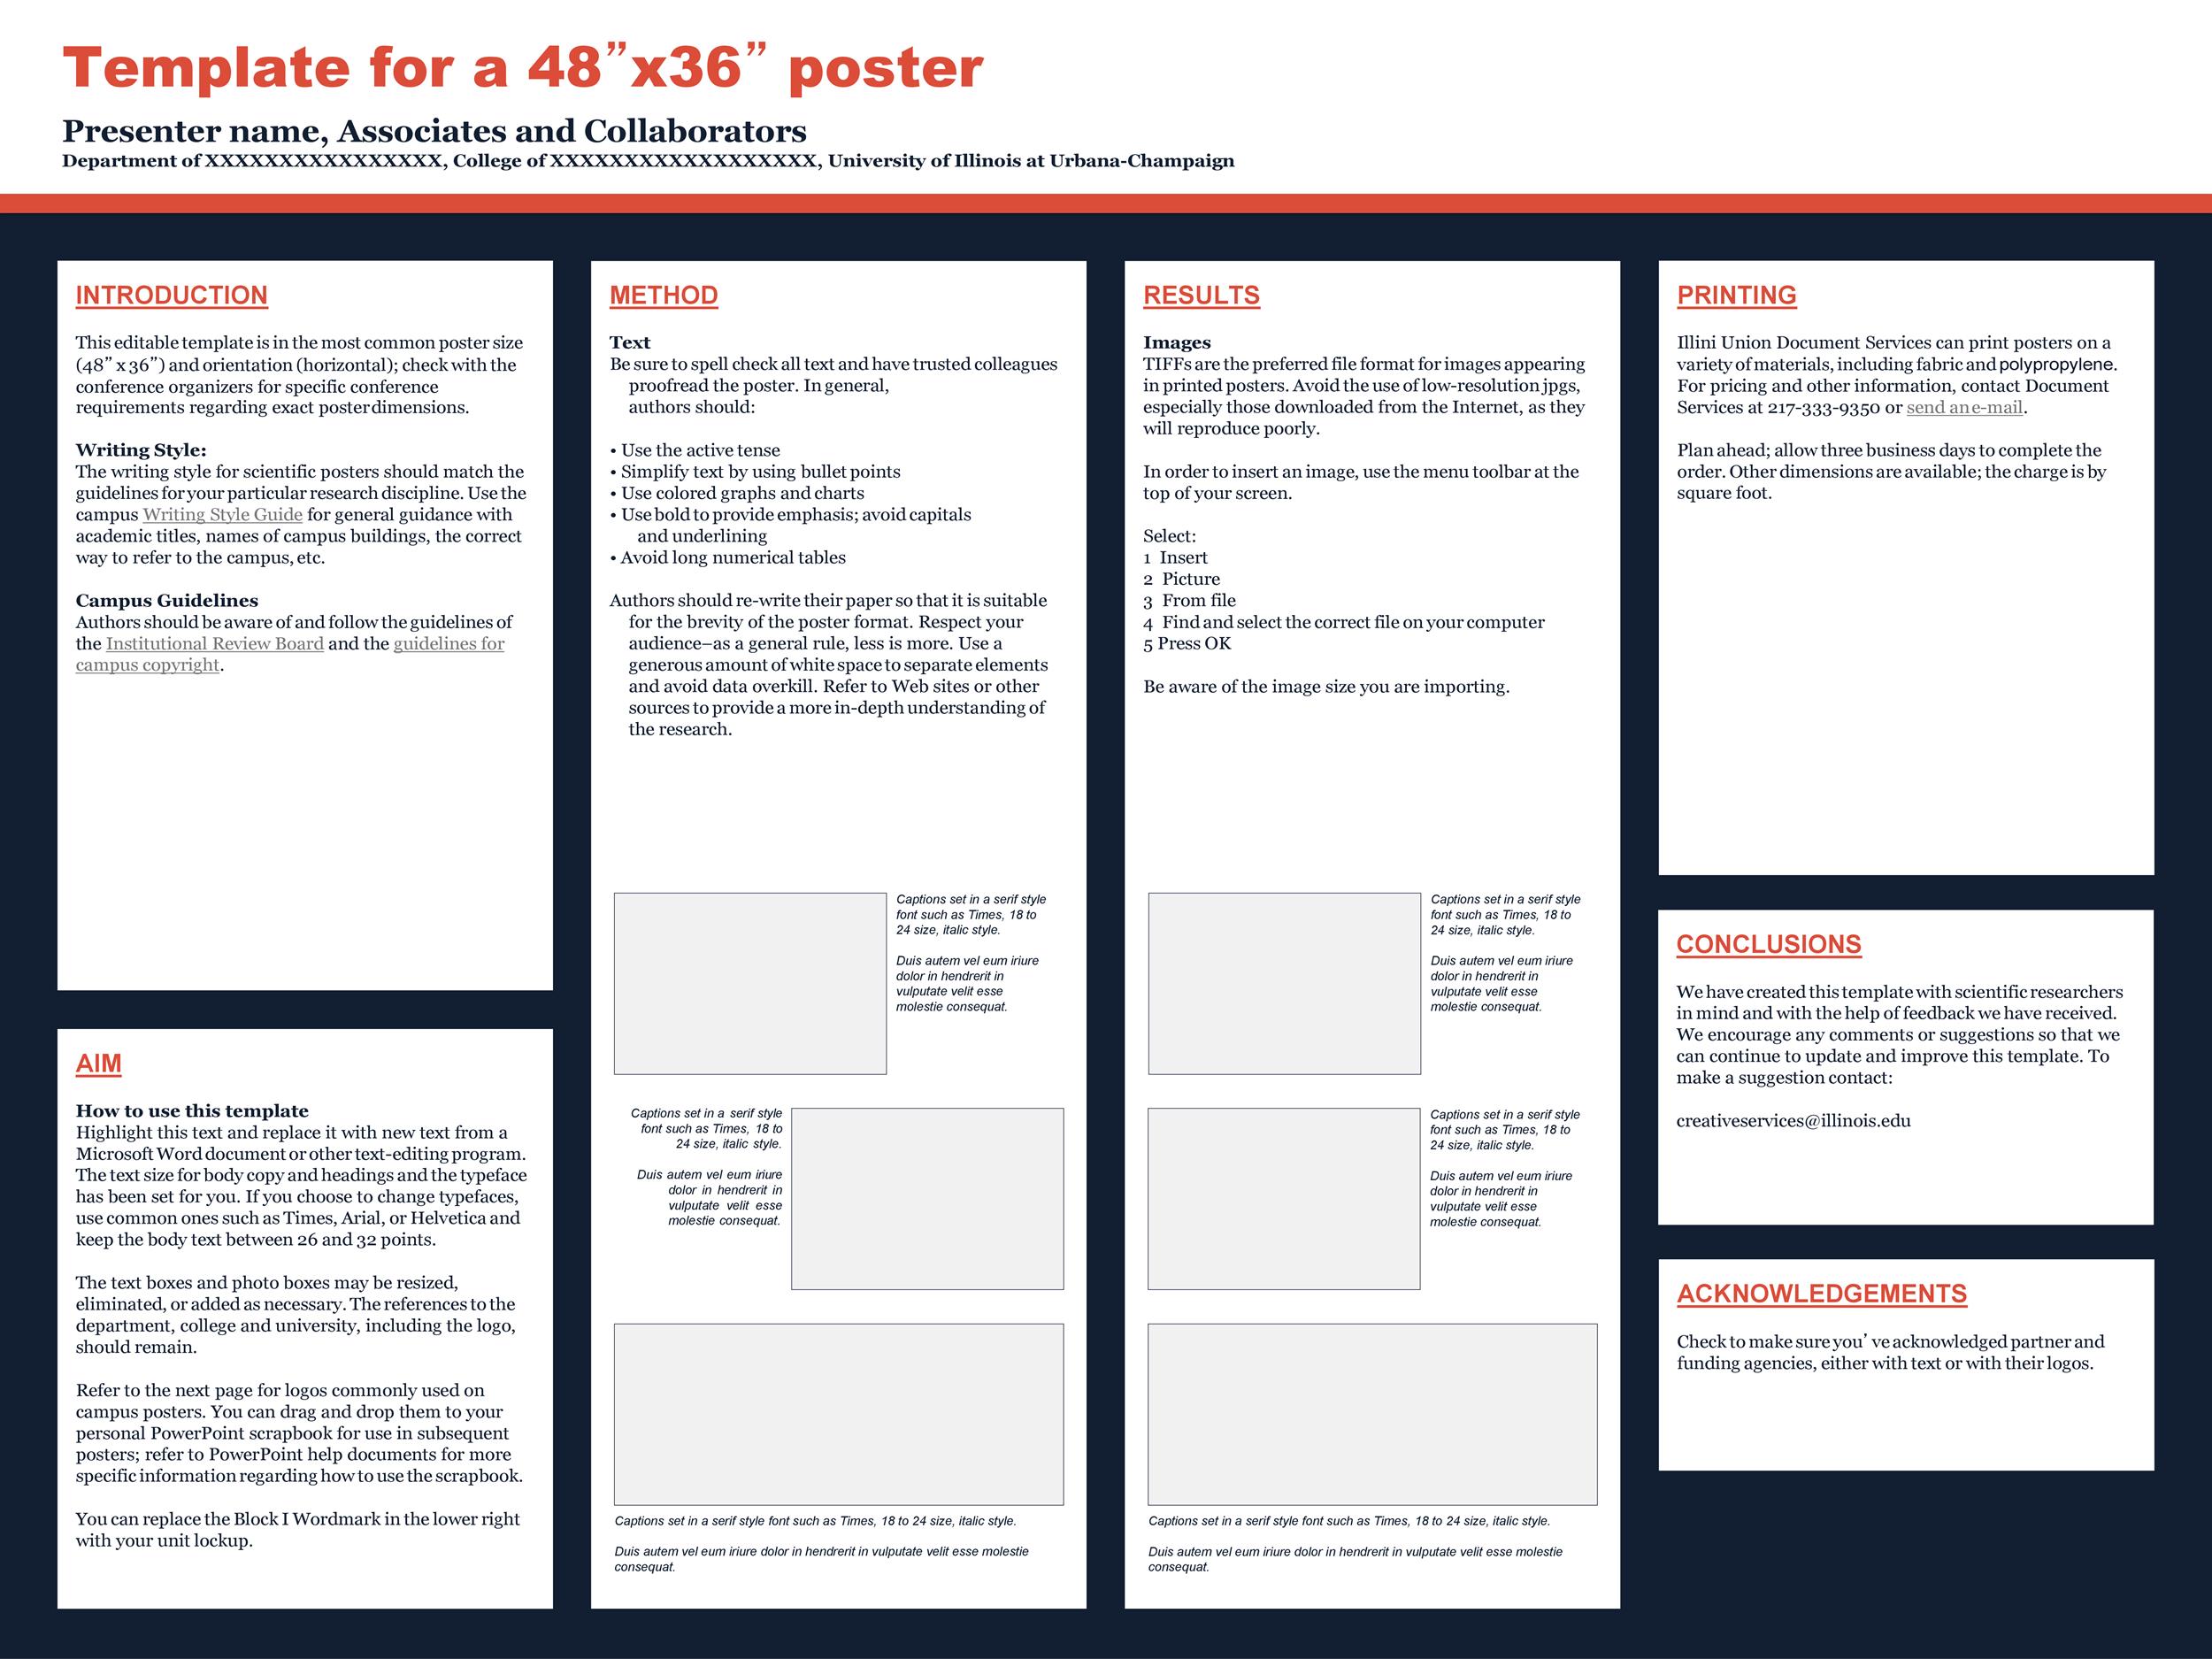 Free research poster template 06